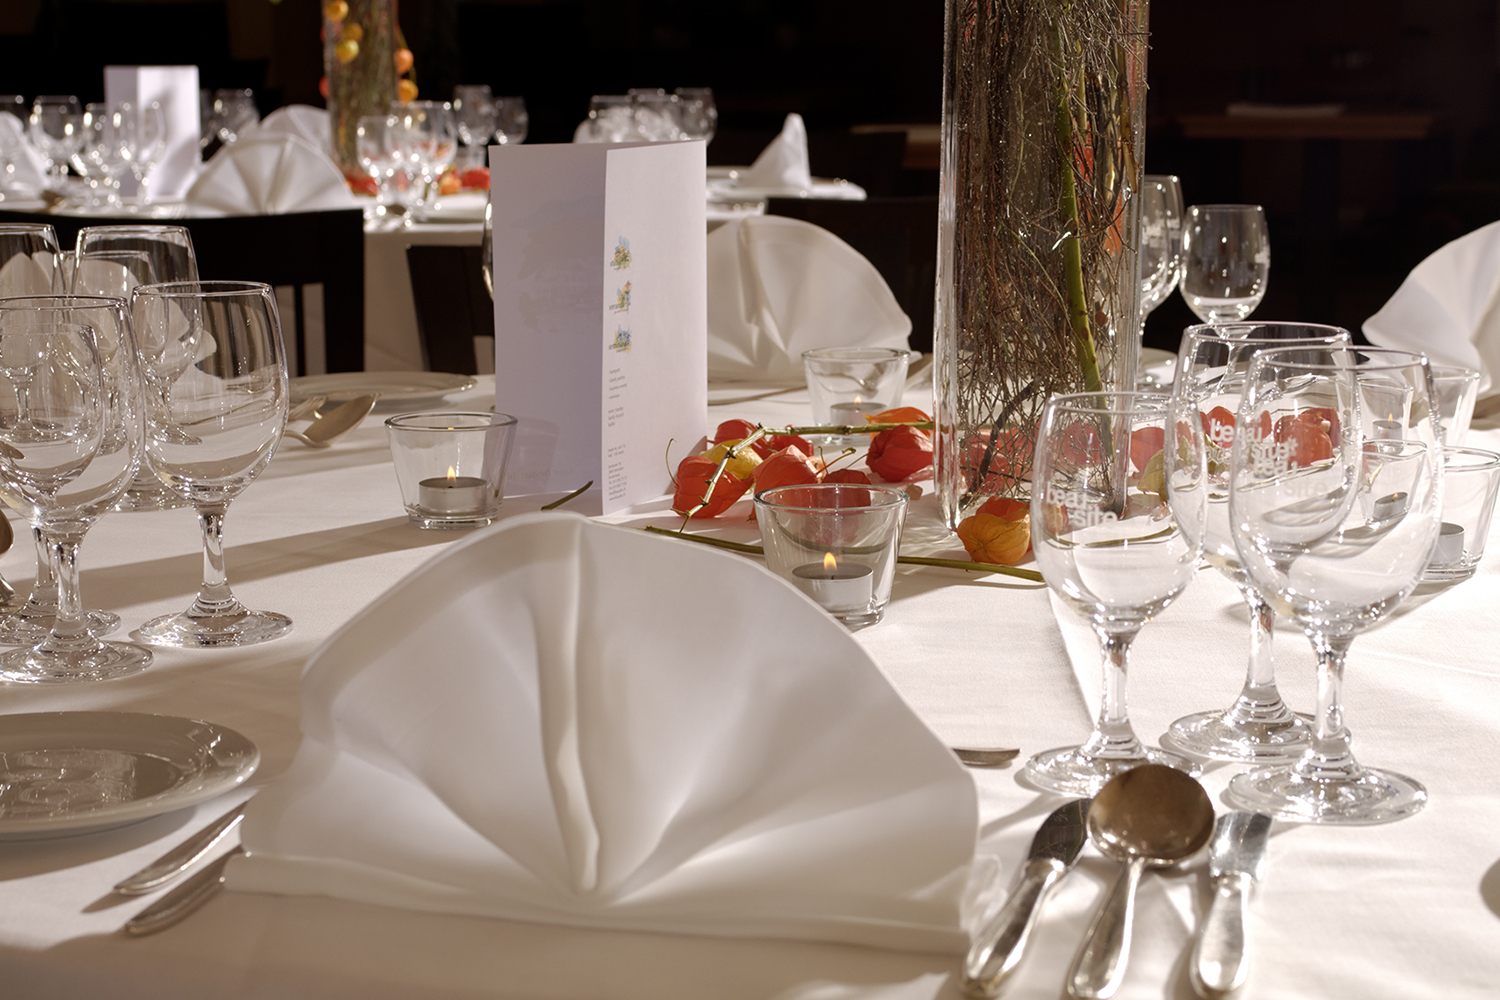 Your event at the Hotel Beausite Interlaken